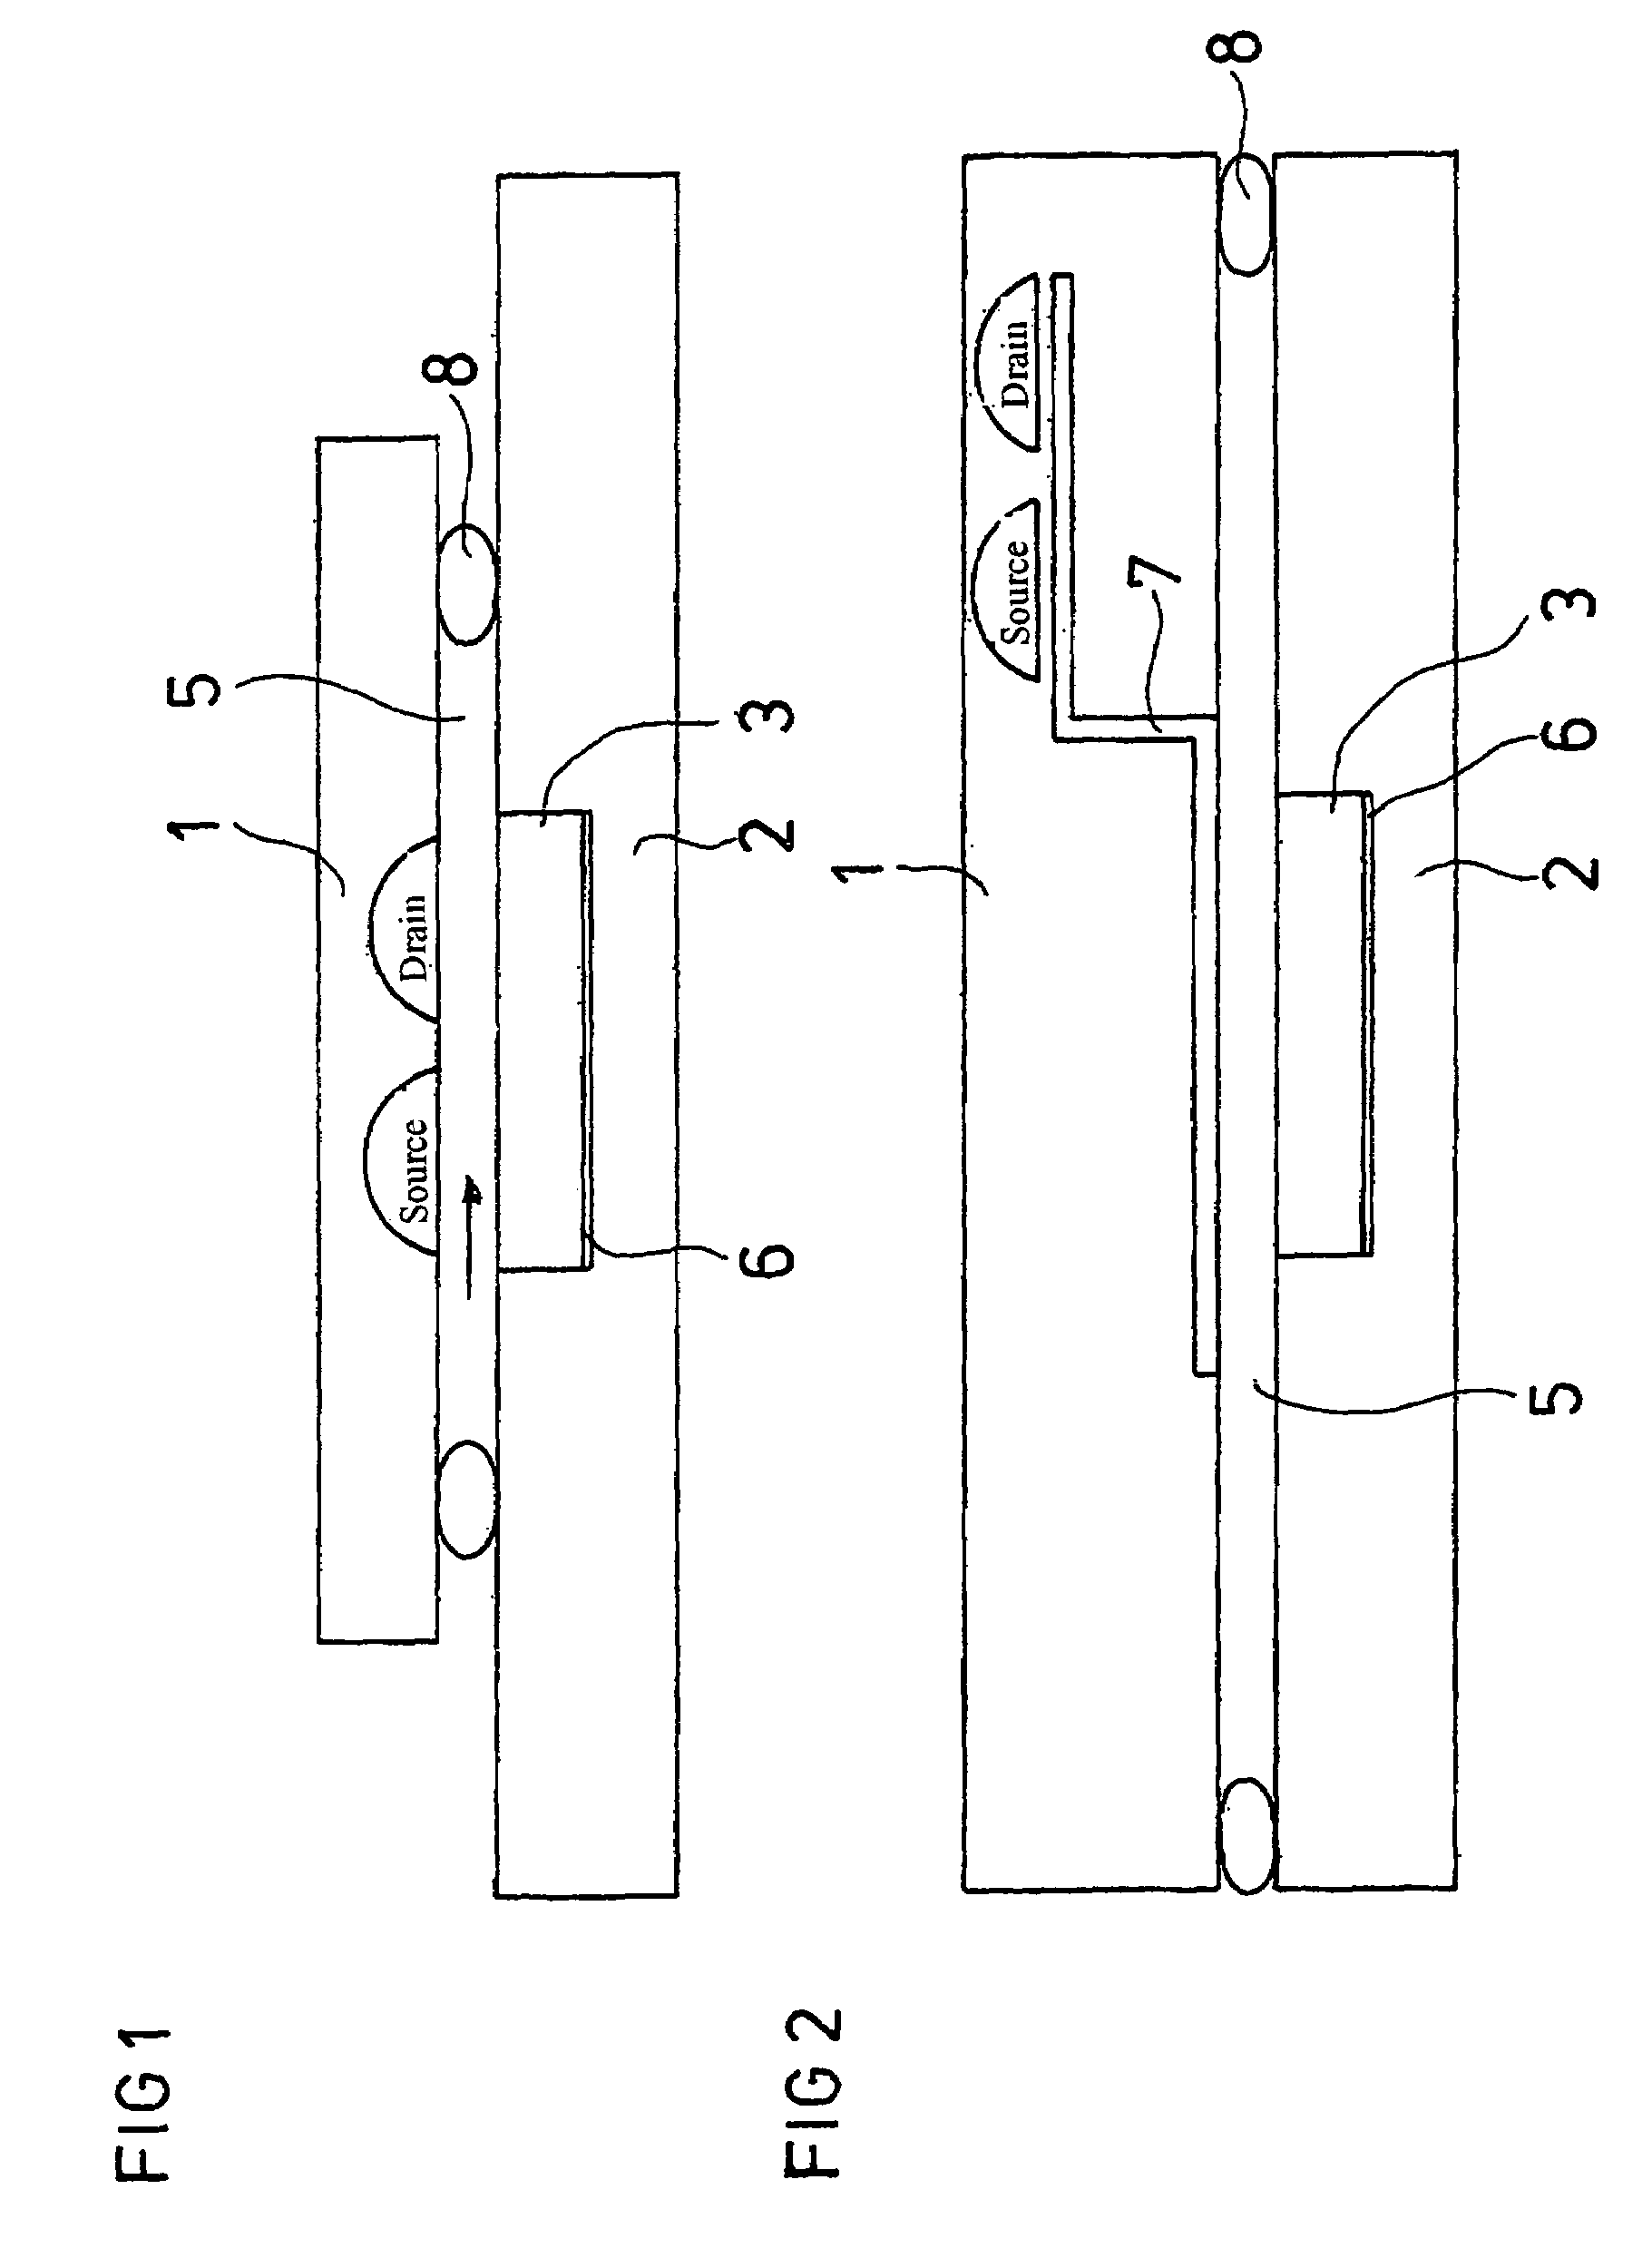 Gas-sensitive field-effect transistor with air gap